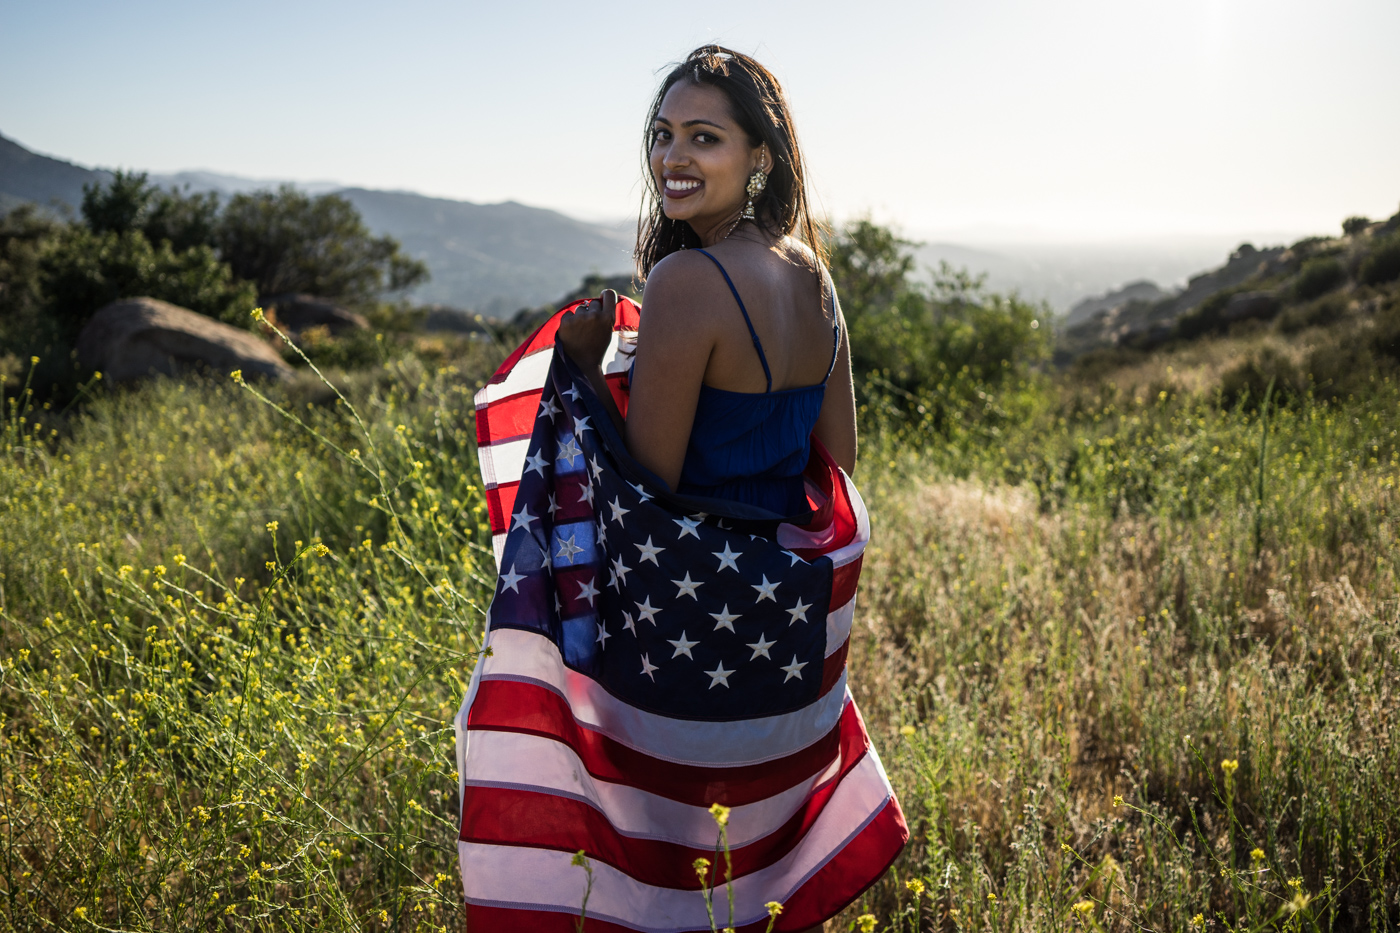 American woman and flag portrait in grassy meadow landscape at sunset